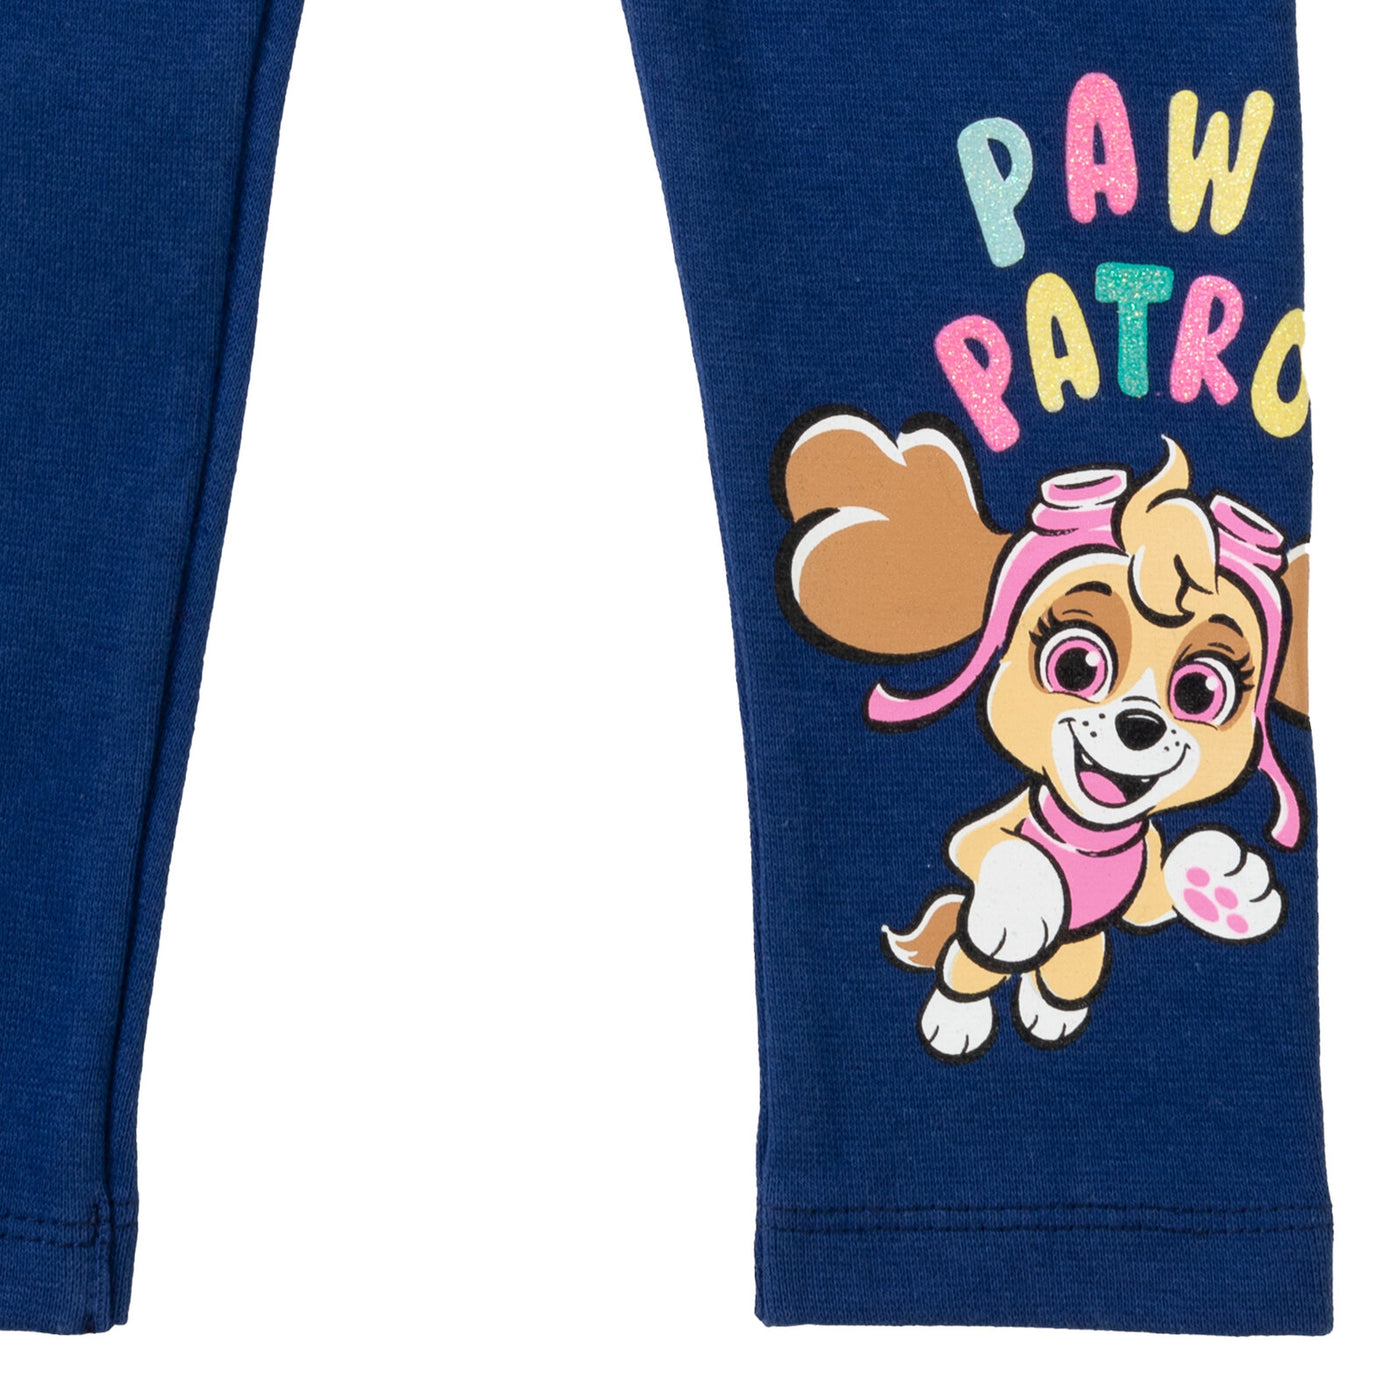 Paw Patrol Pullover Crossover Fleece Hoodie and Leggings Outfit Set